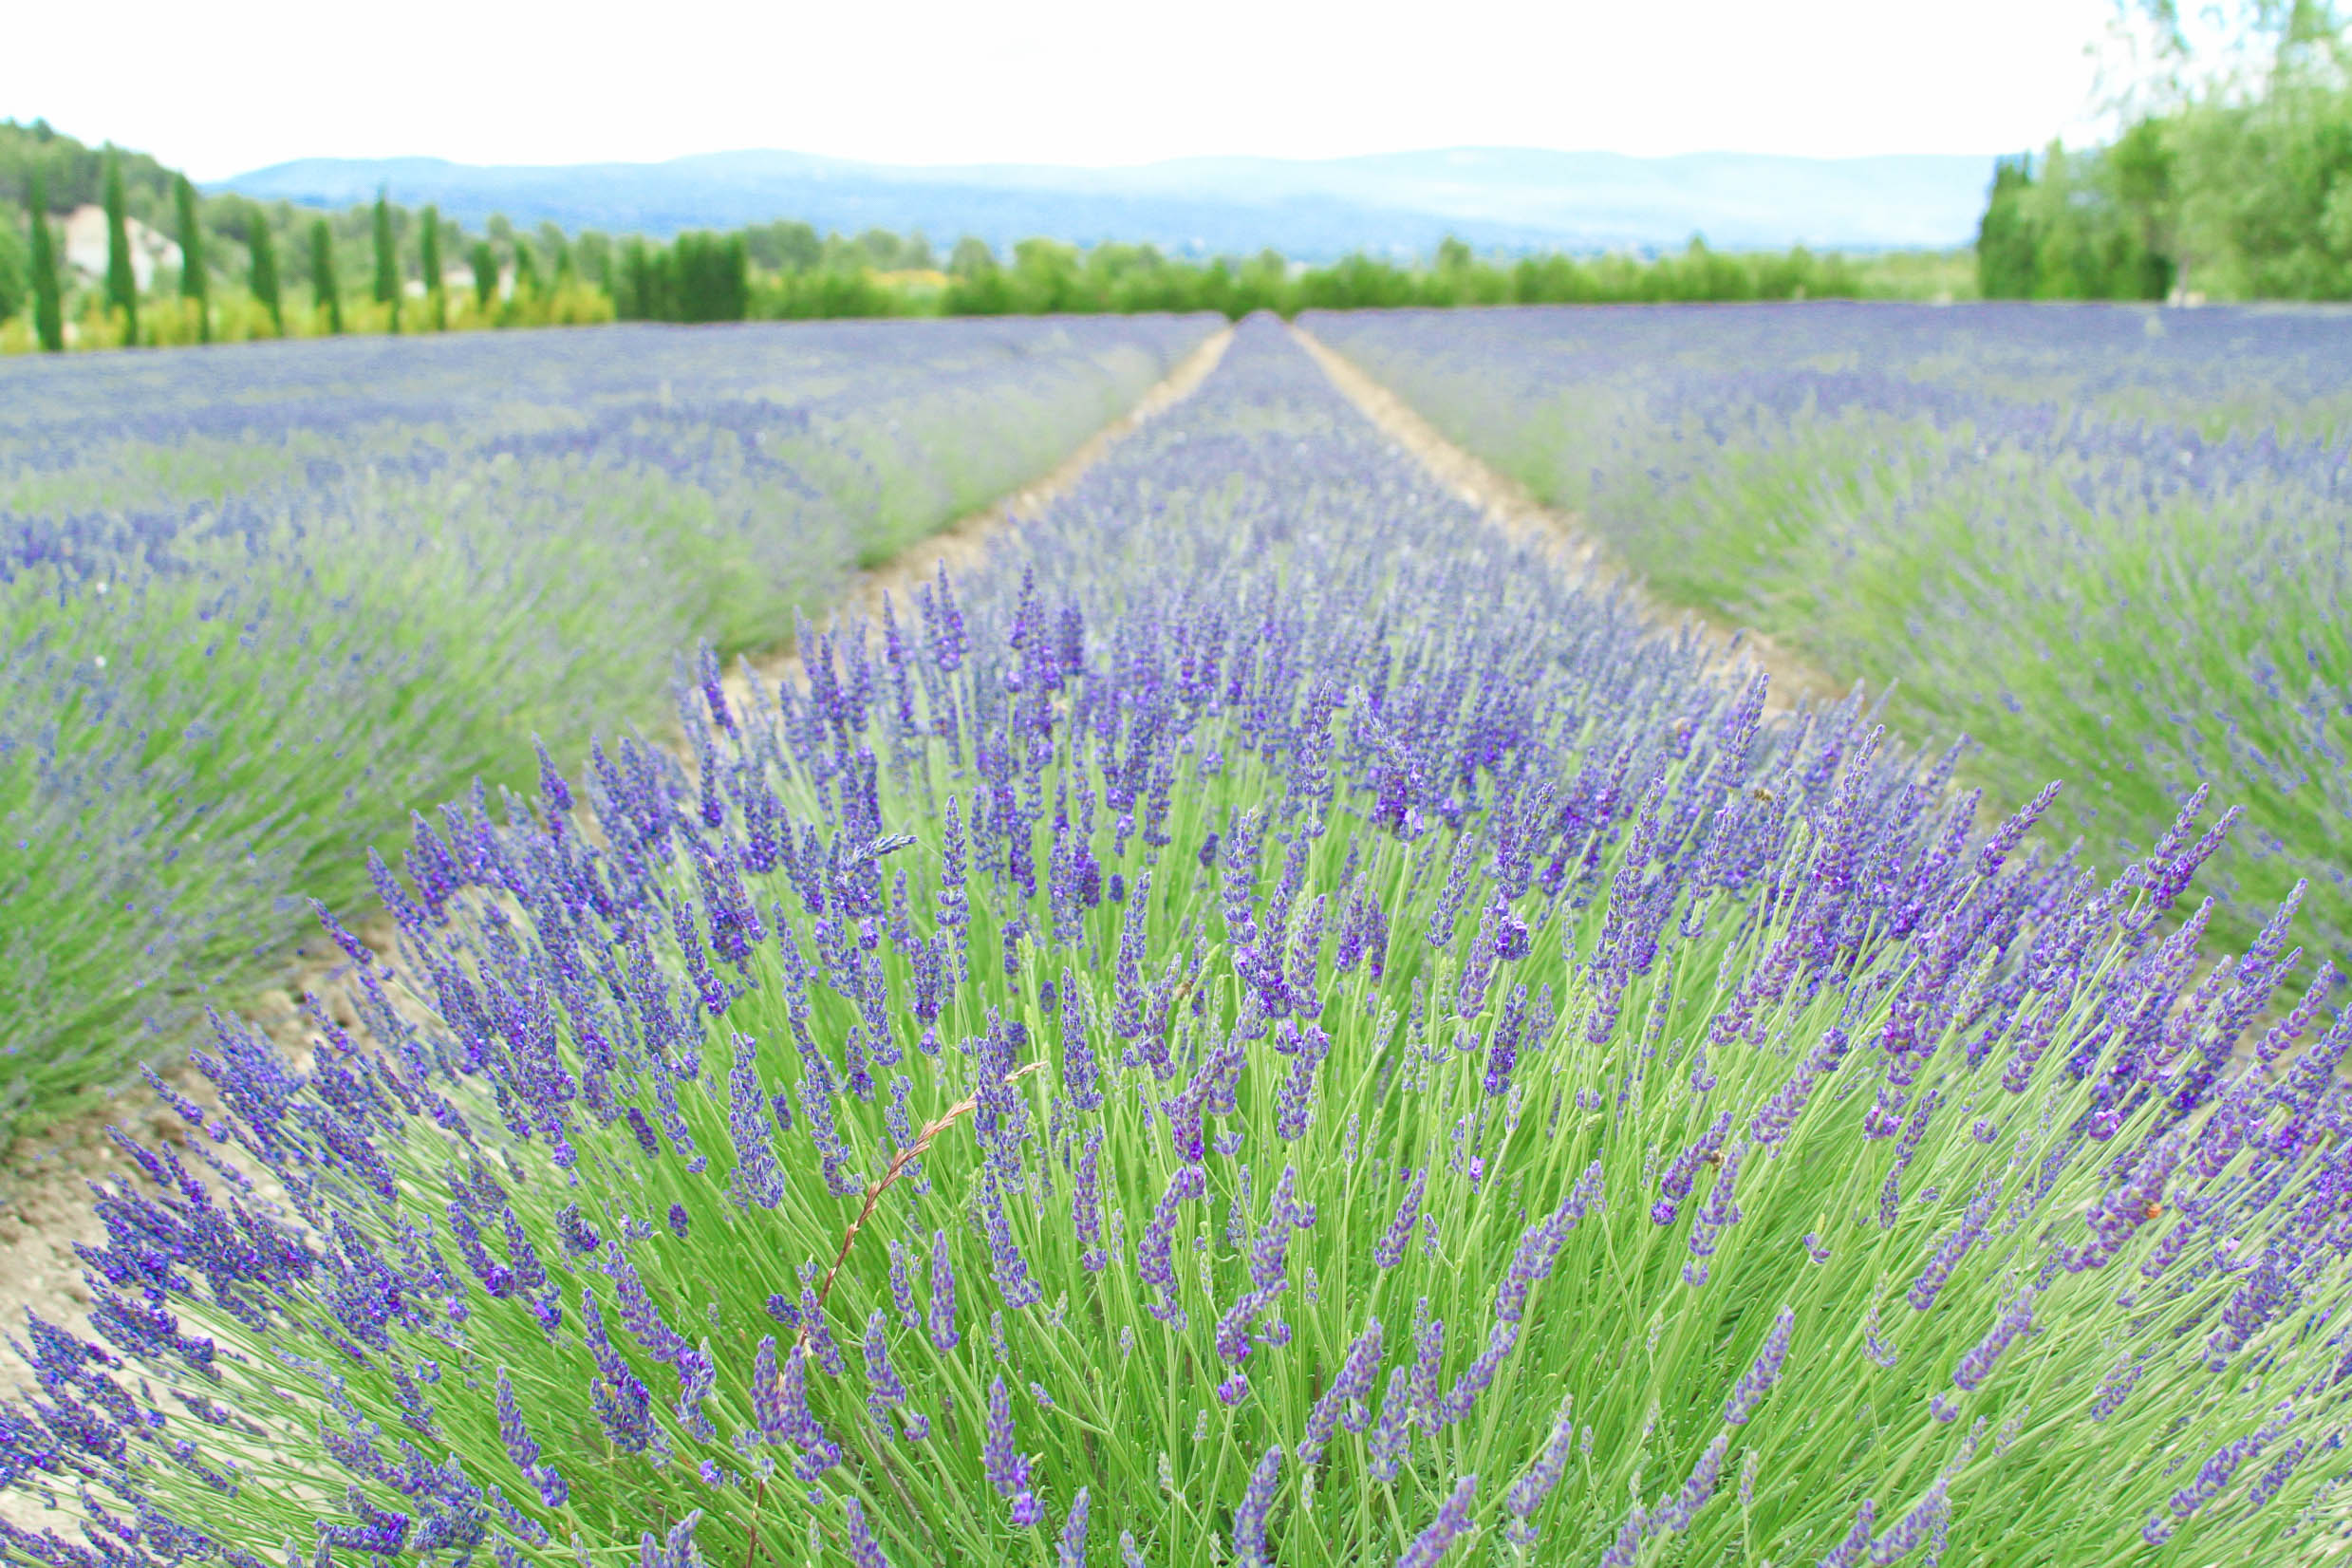 "...we couldn't resist a stop at the early-blooming lavender field we found on the way into Roussillon." | #mfrancisdesigntravels